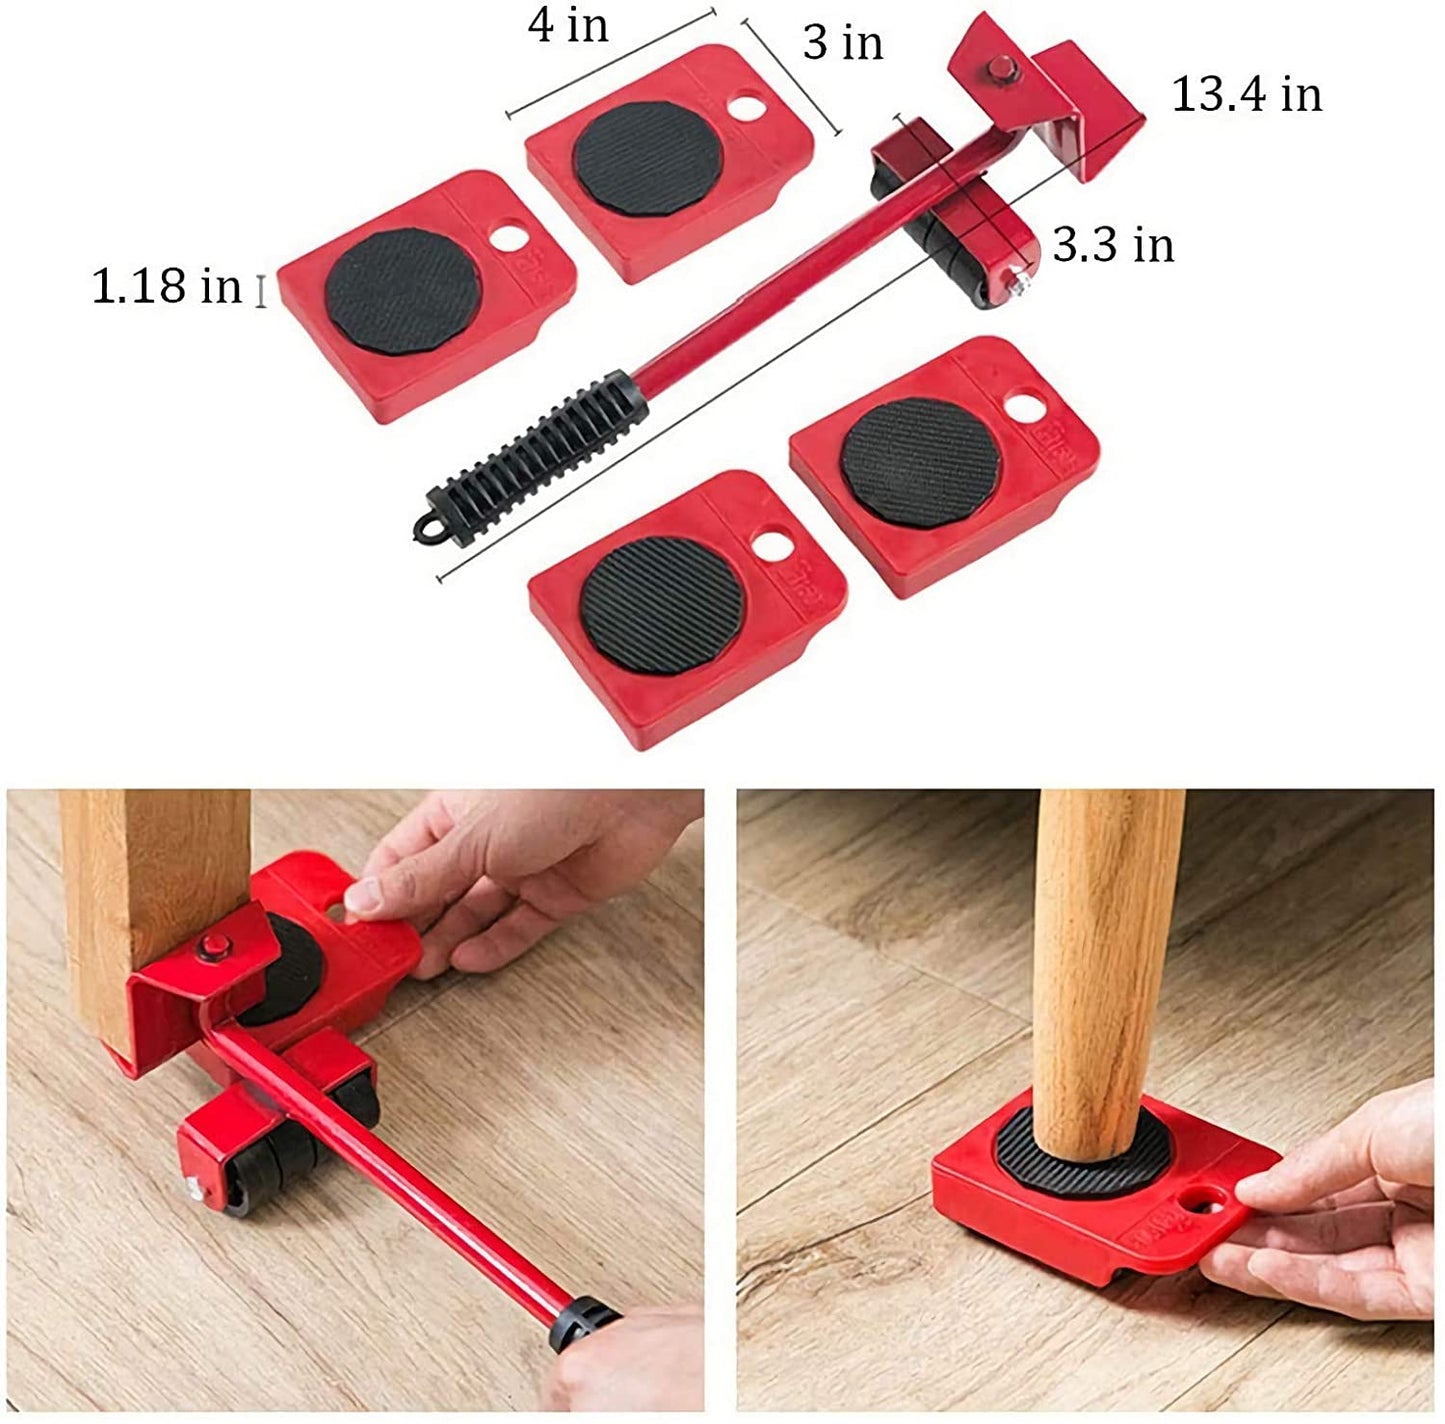 ( Hot Sale - 50% Off + Buy 2 Free Shipping ) Furniture Lifter Sliders